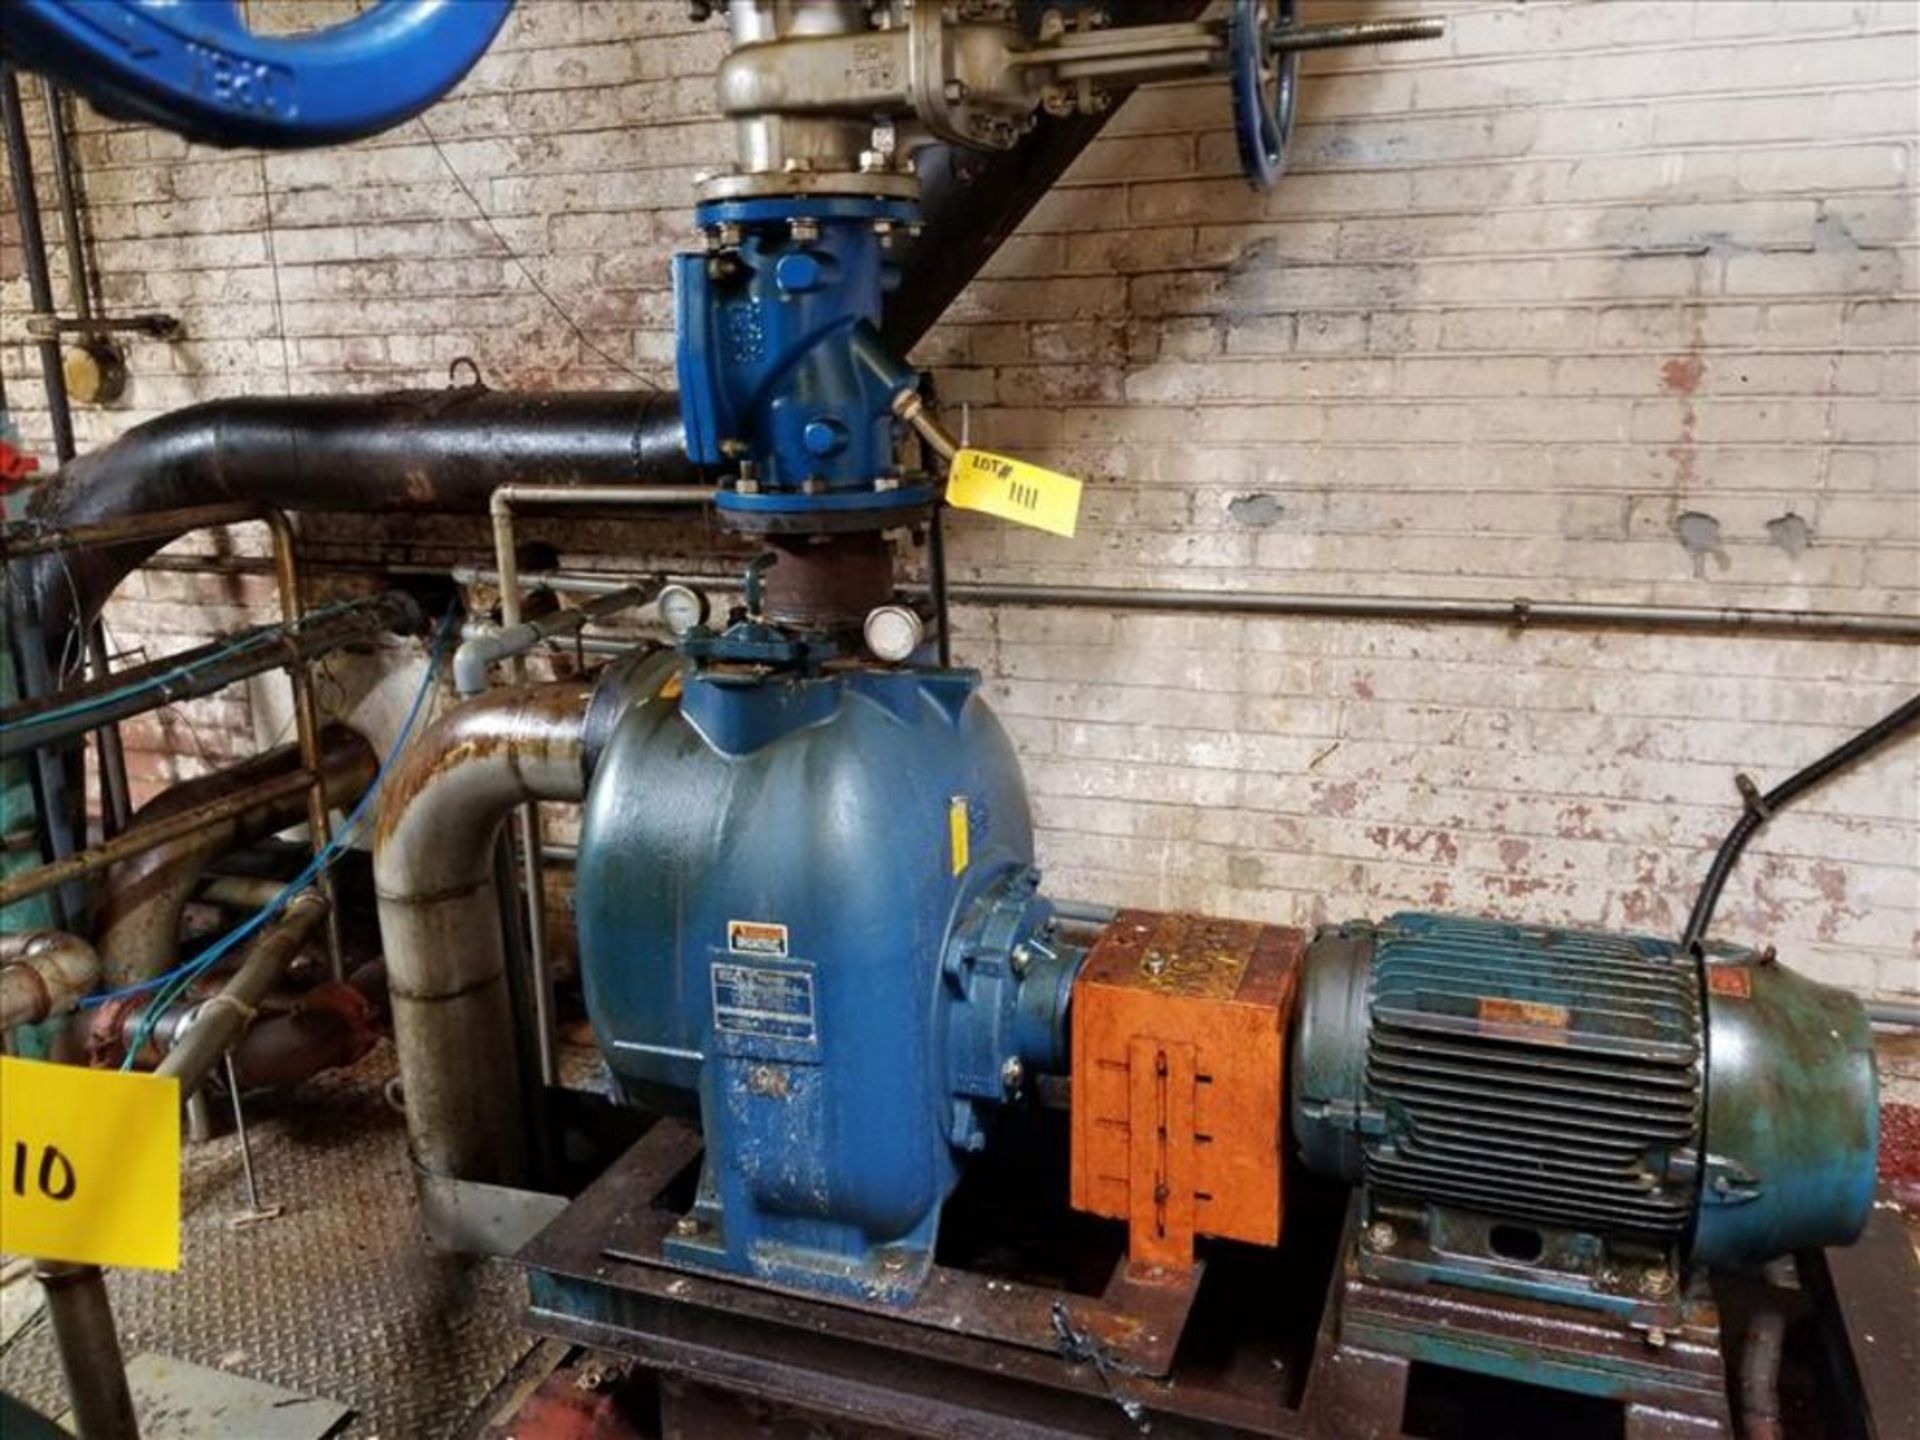 Gorman Rupp waste pump mod. no. T6A61S-B self priming centrifugal pump with Val Matic model 506C